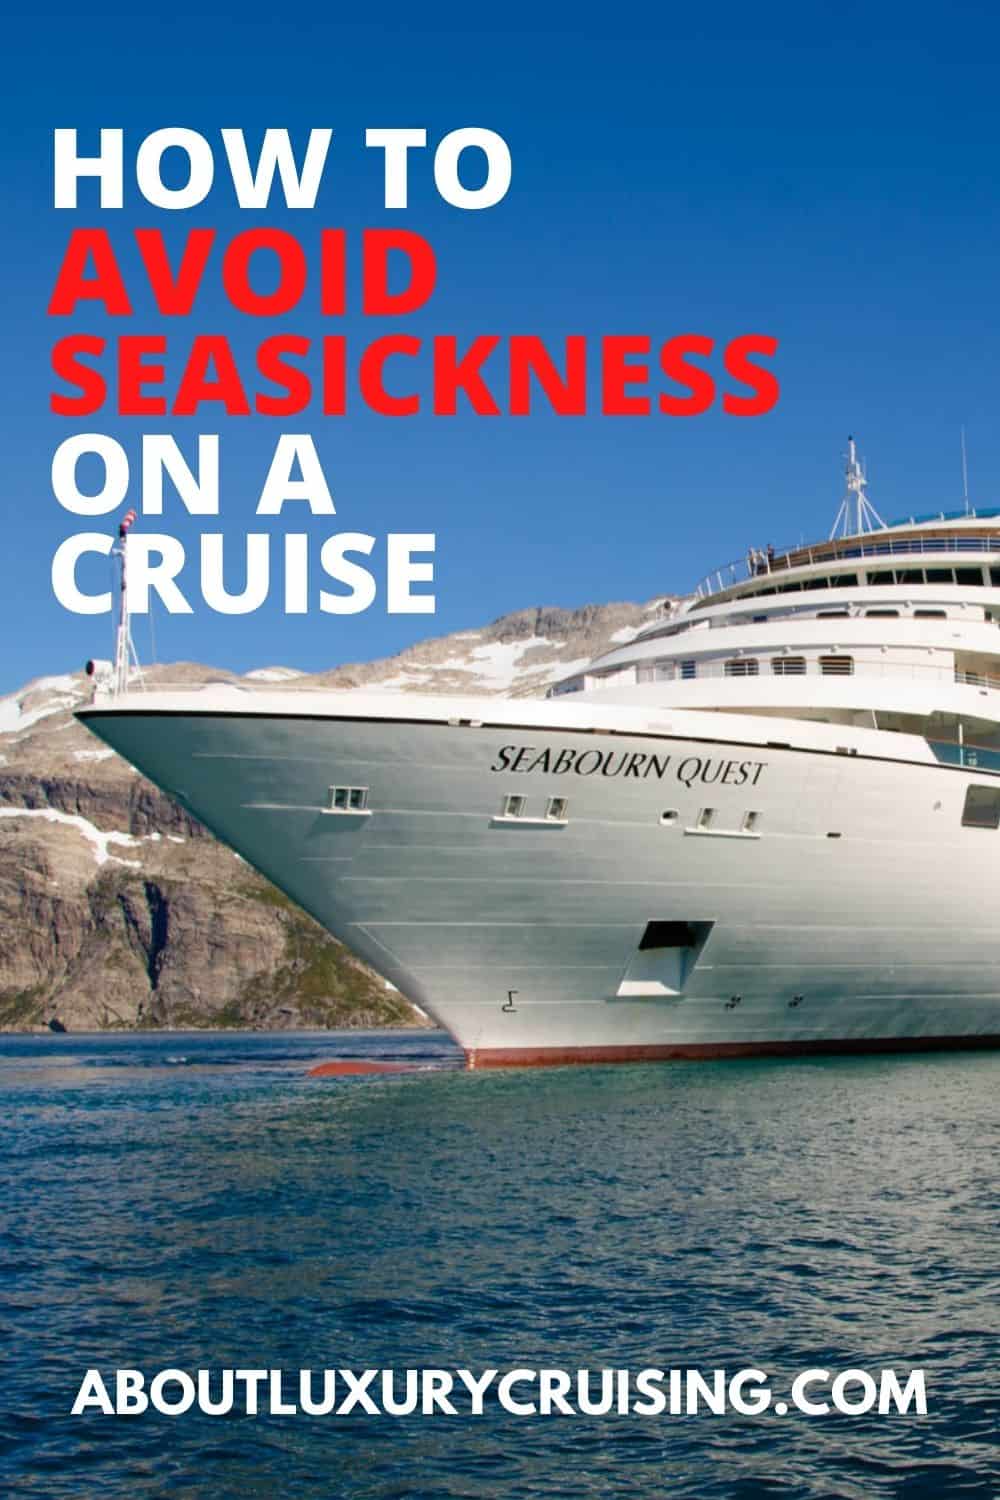 How to Avoid Seasickness on a Cruise